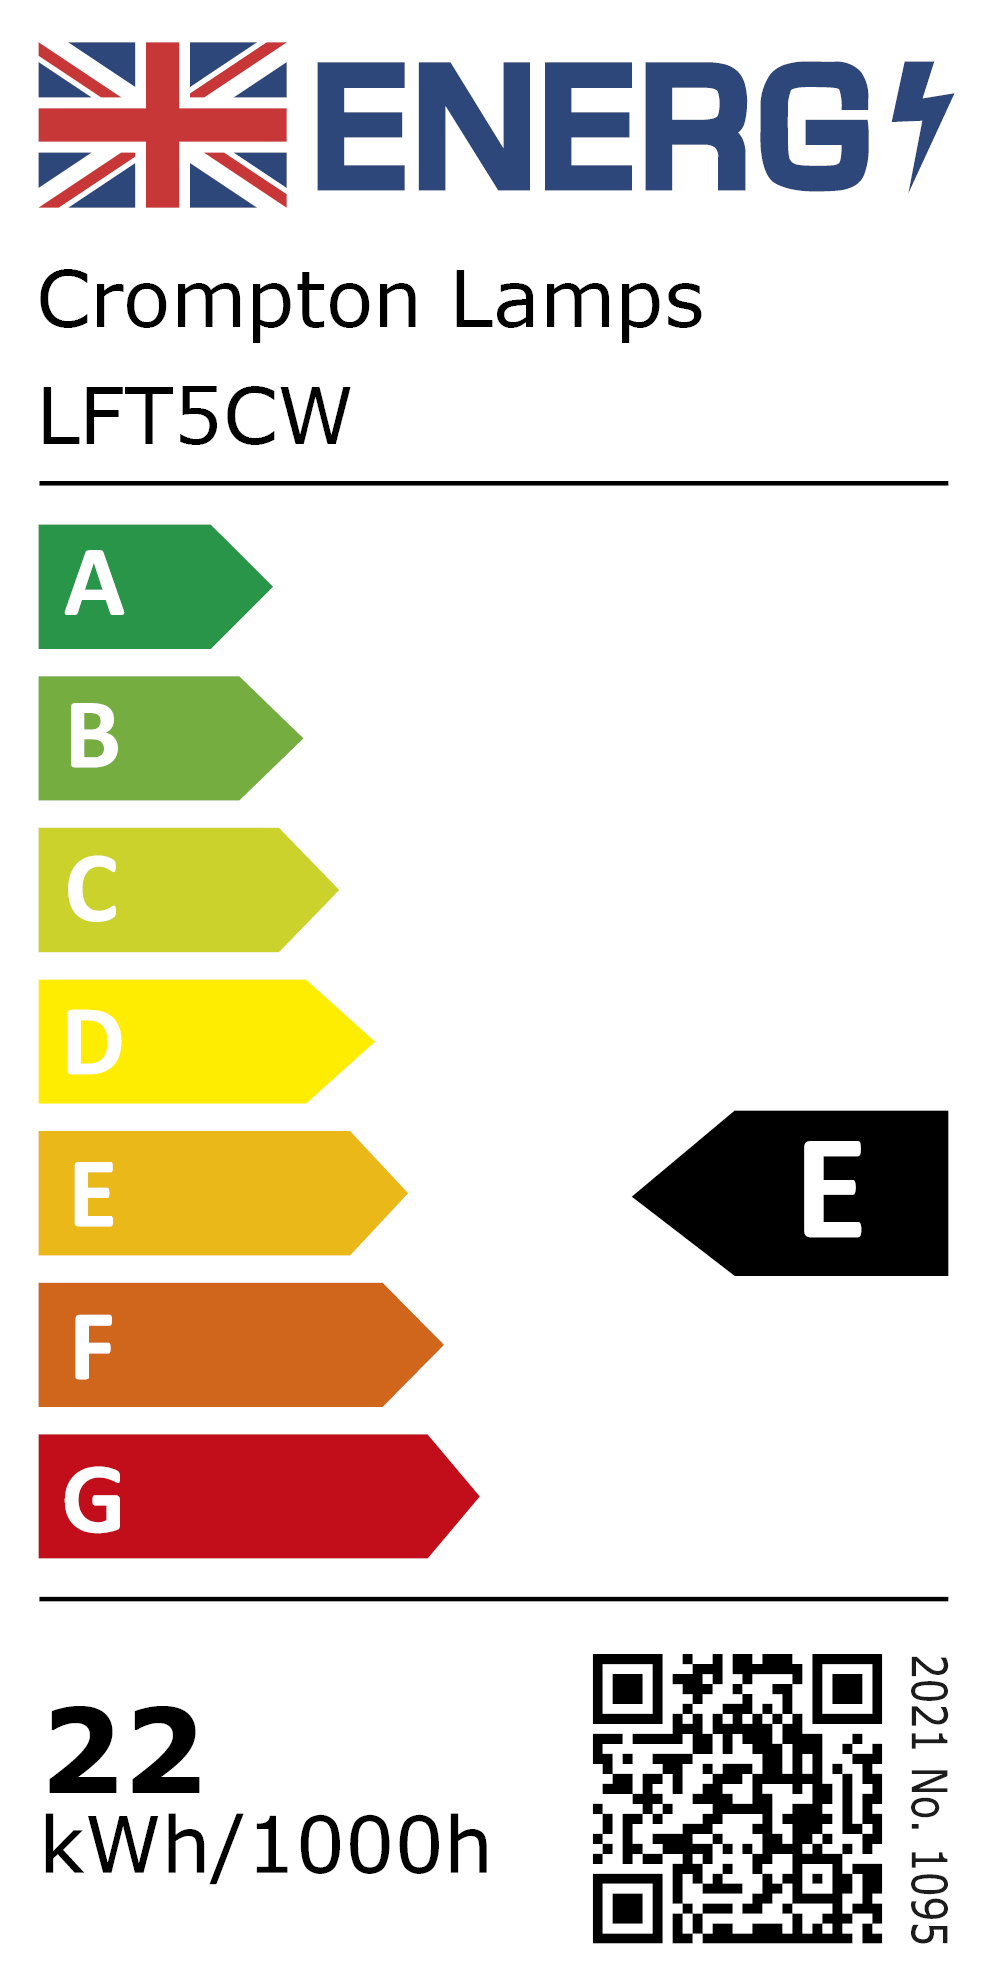 New 2021 Energy Rating Label: Stock Code LFT5CW